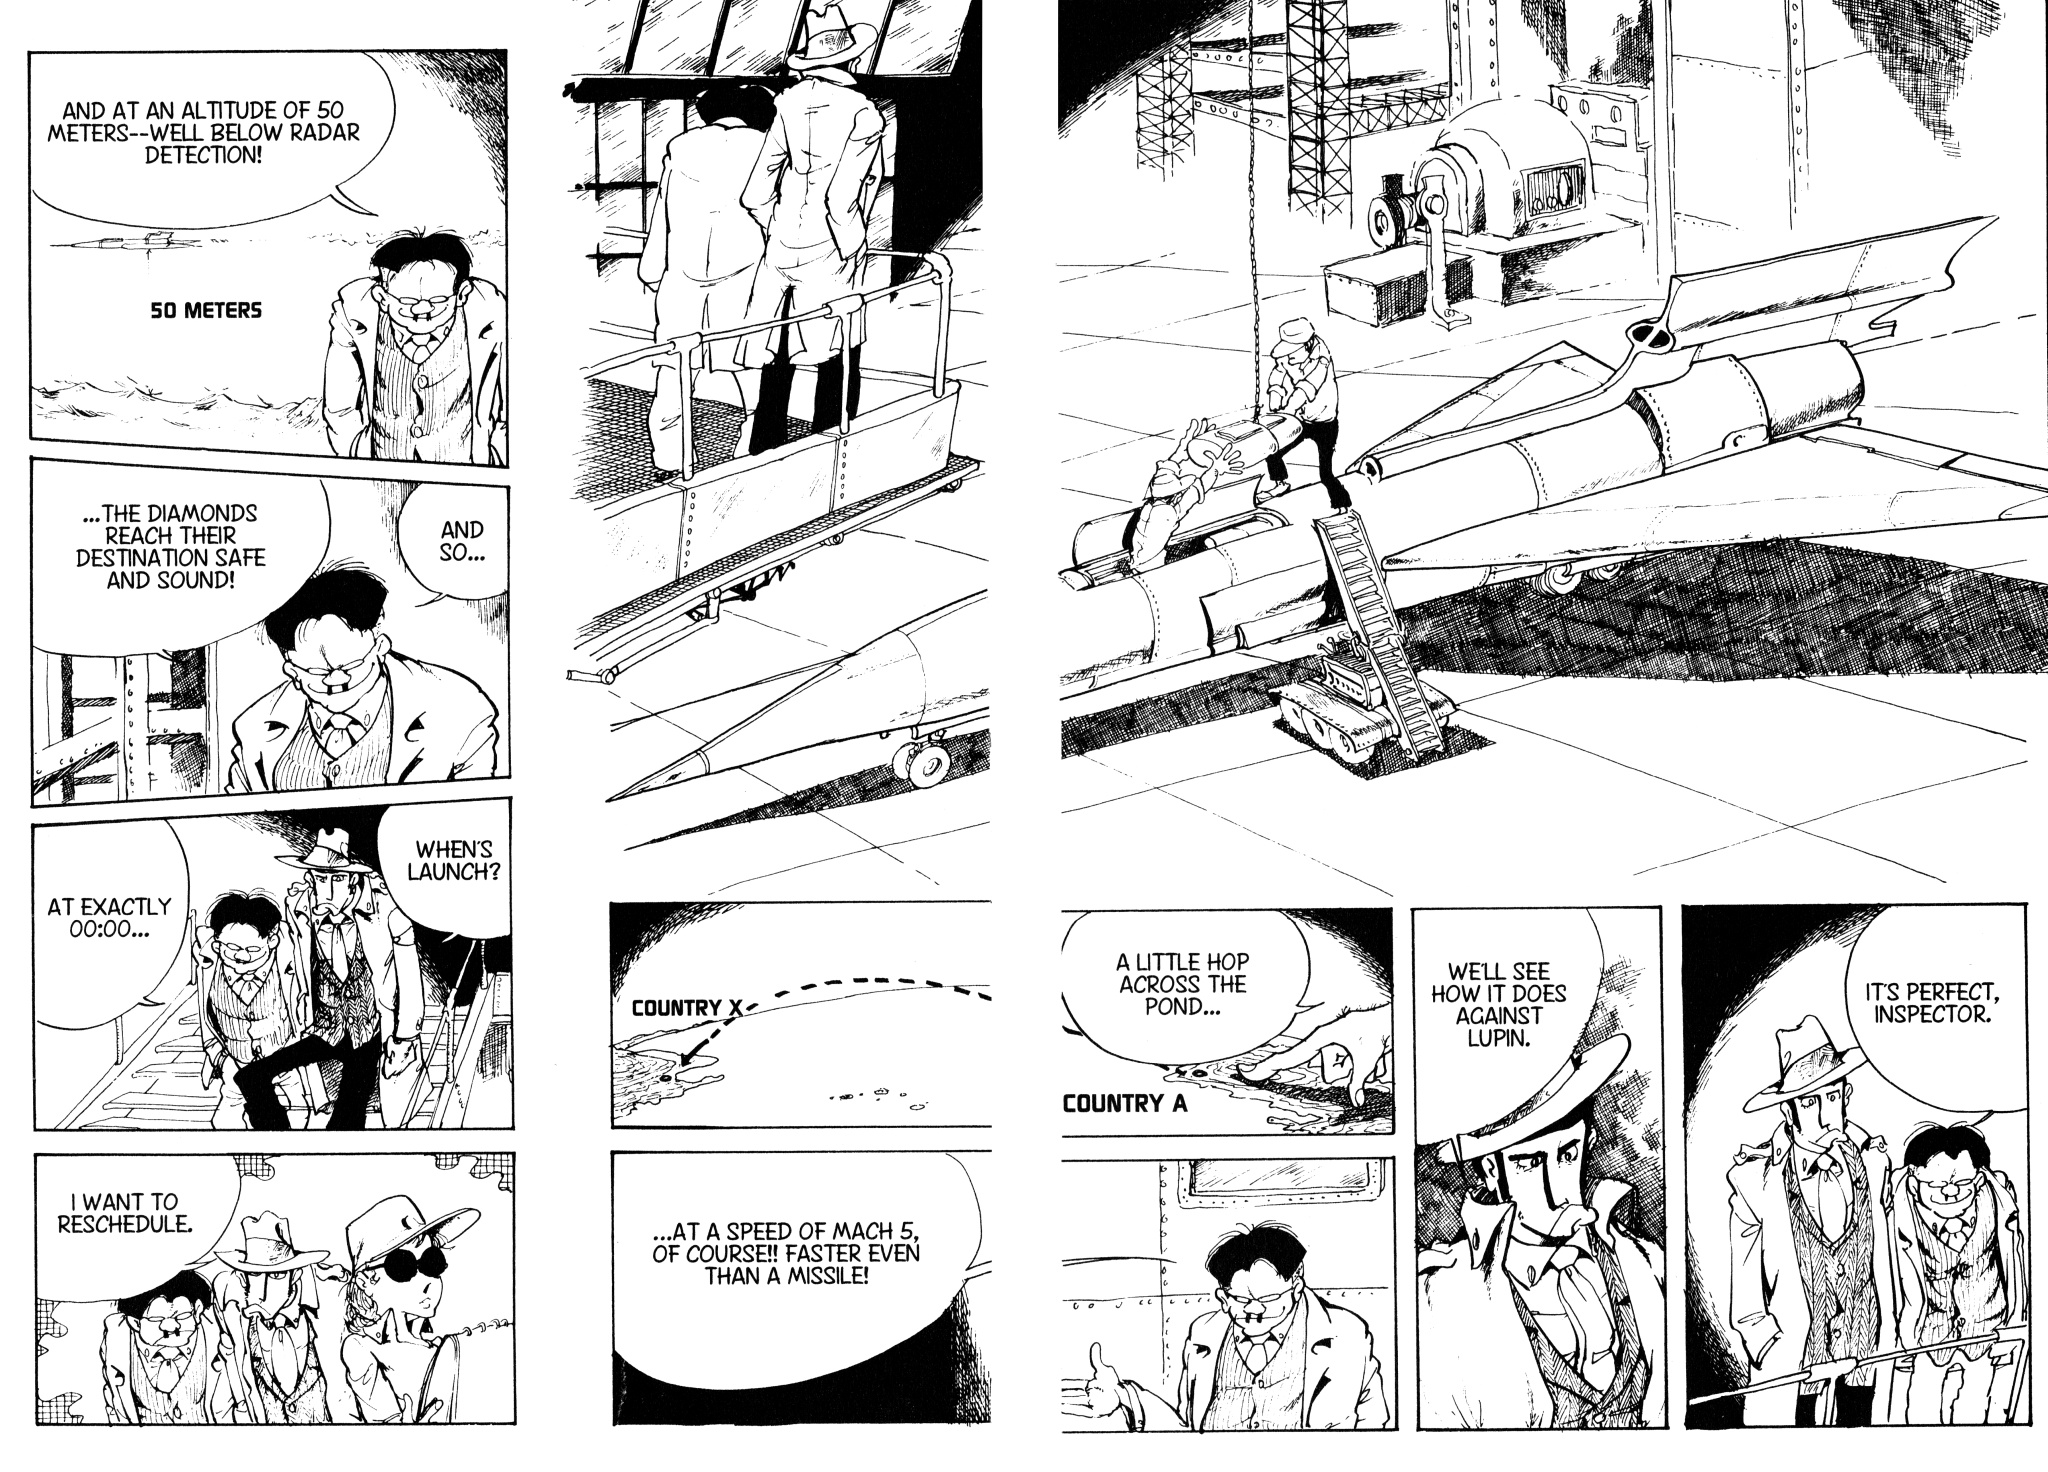 Lupin Iii: World’S Most Wanted Vol.4 Chapter 32: Don't Rocket 'til You've Tried It - Picture 2